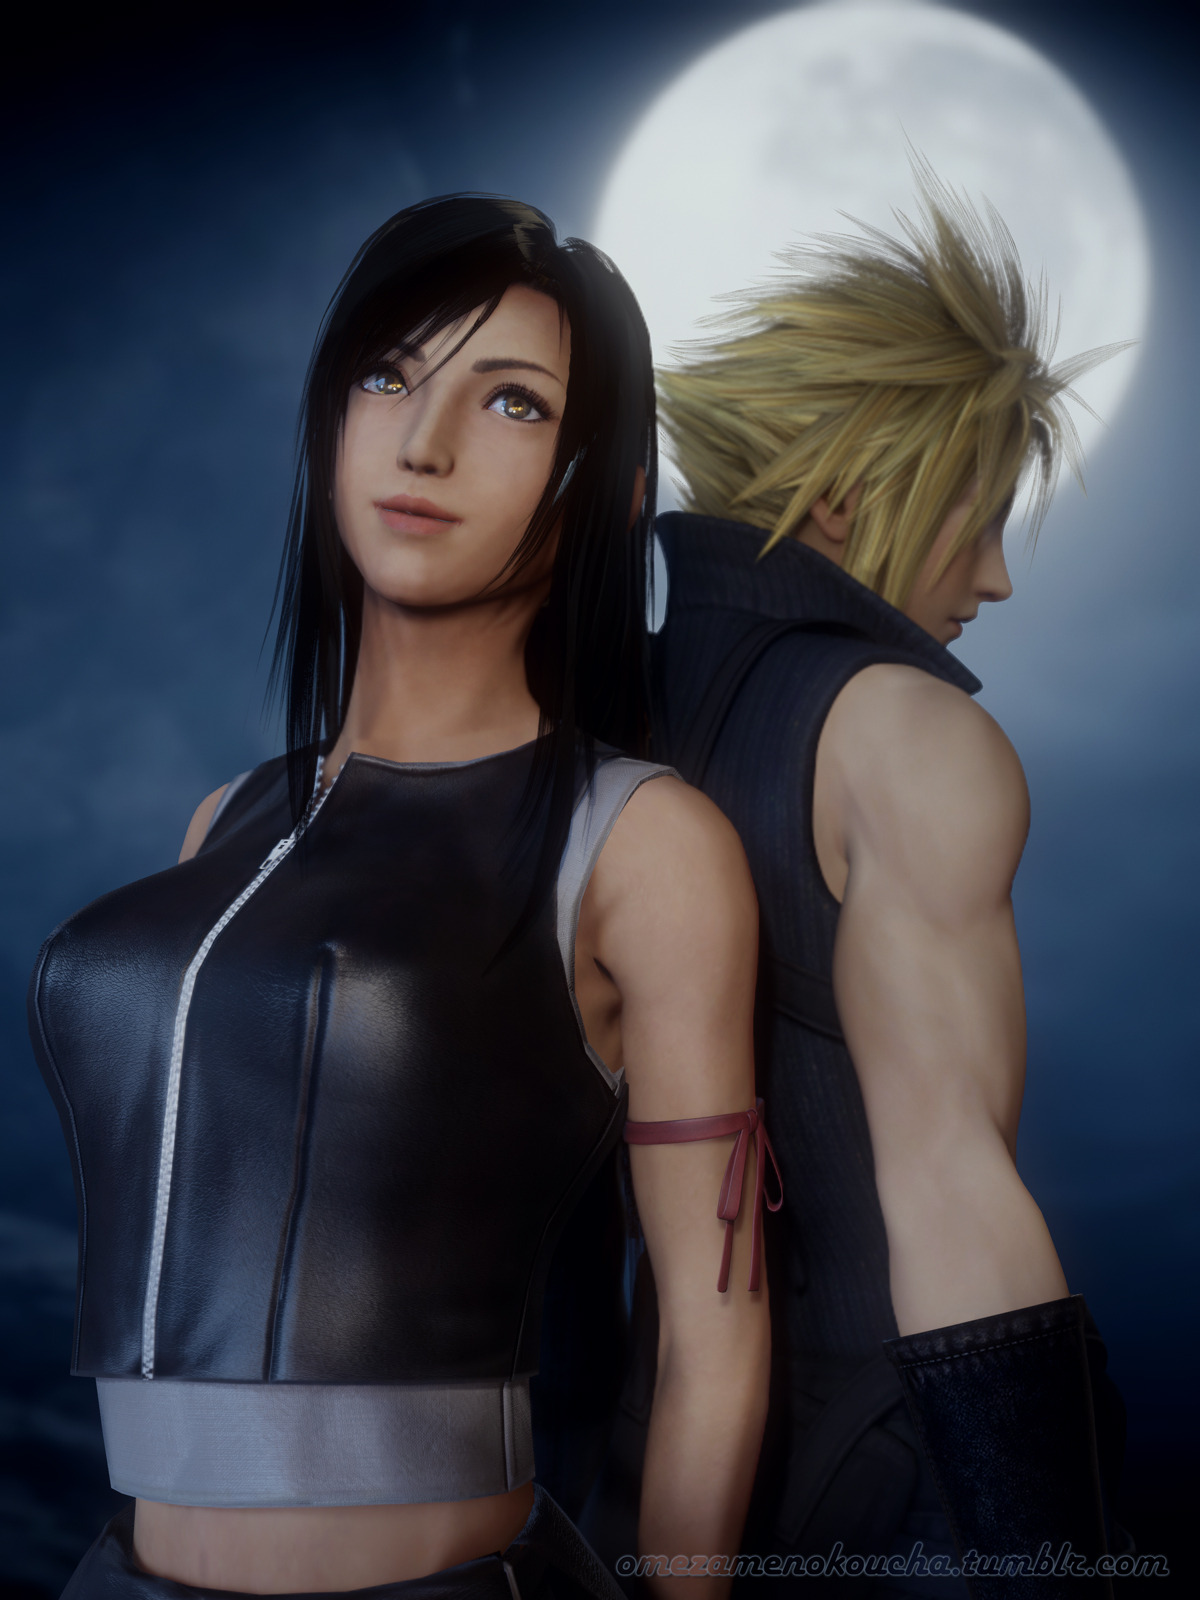 Omezame No Koucha — Cloud Strife And Tifa Lockhart Are Characters From